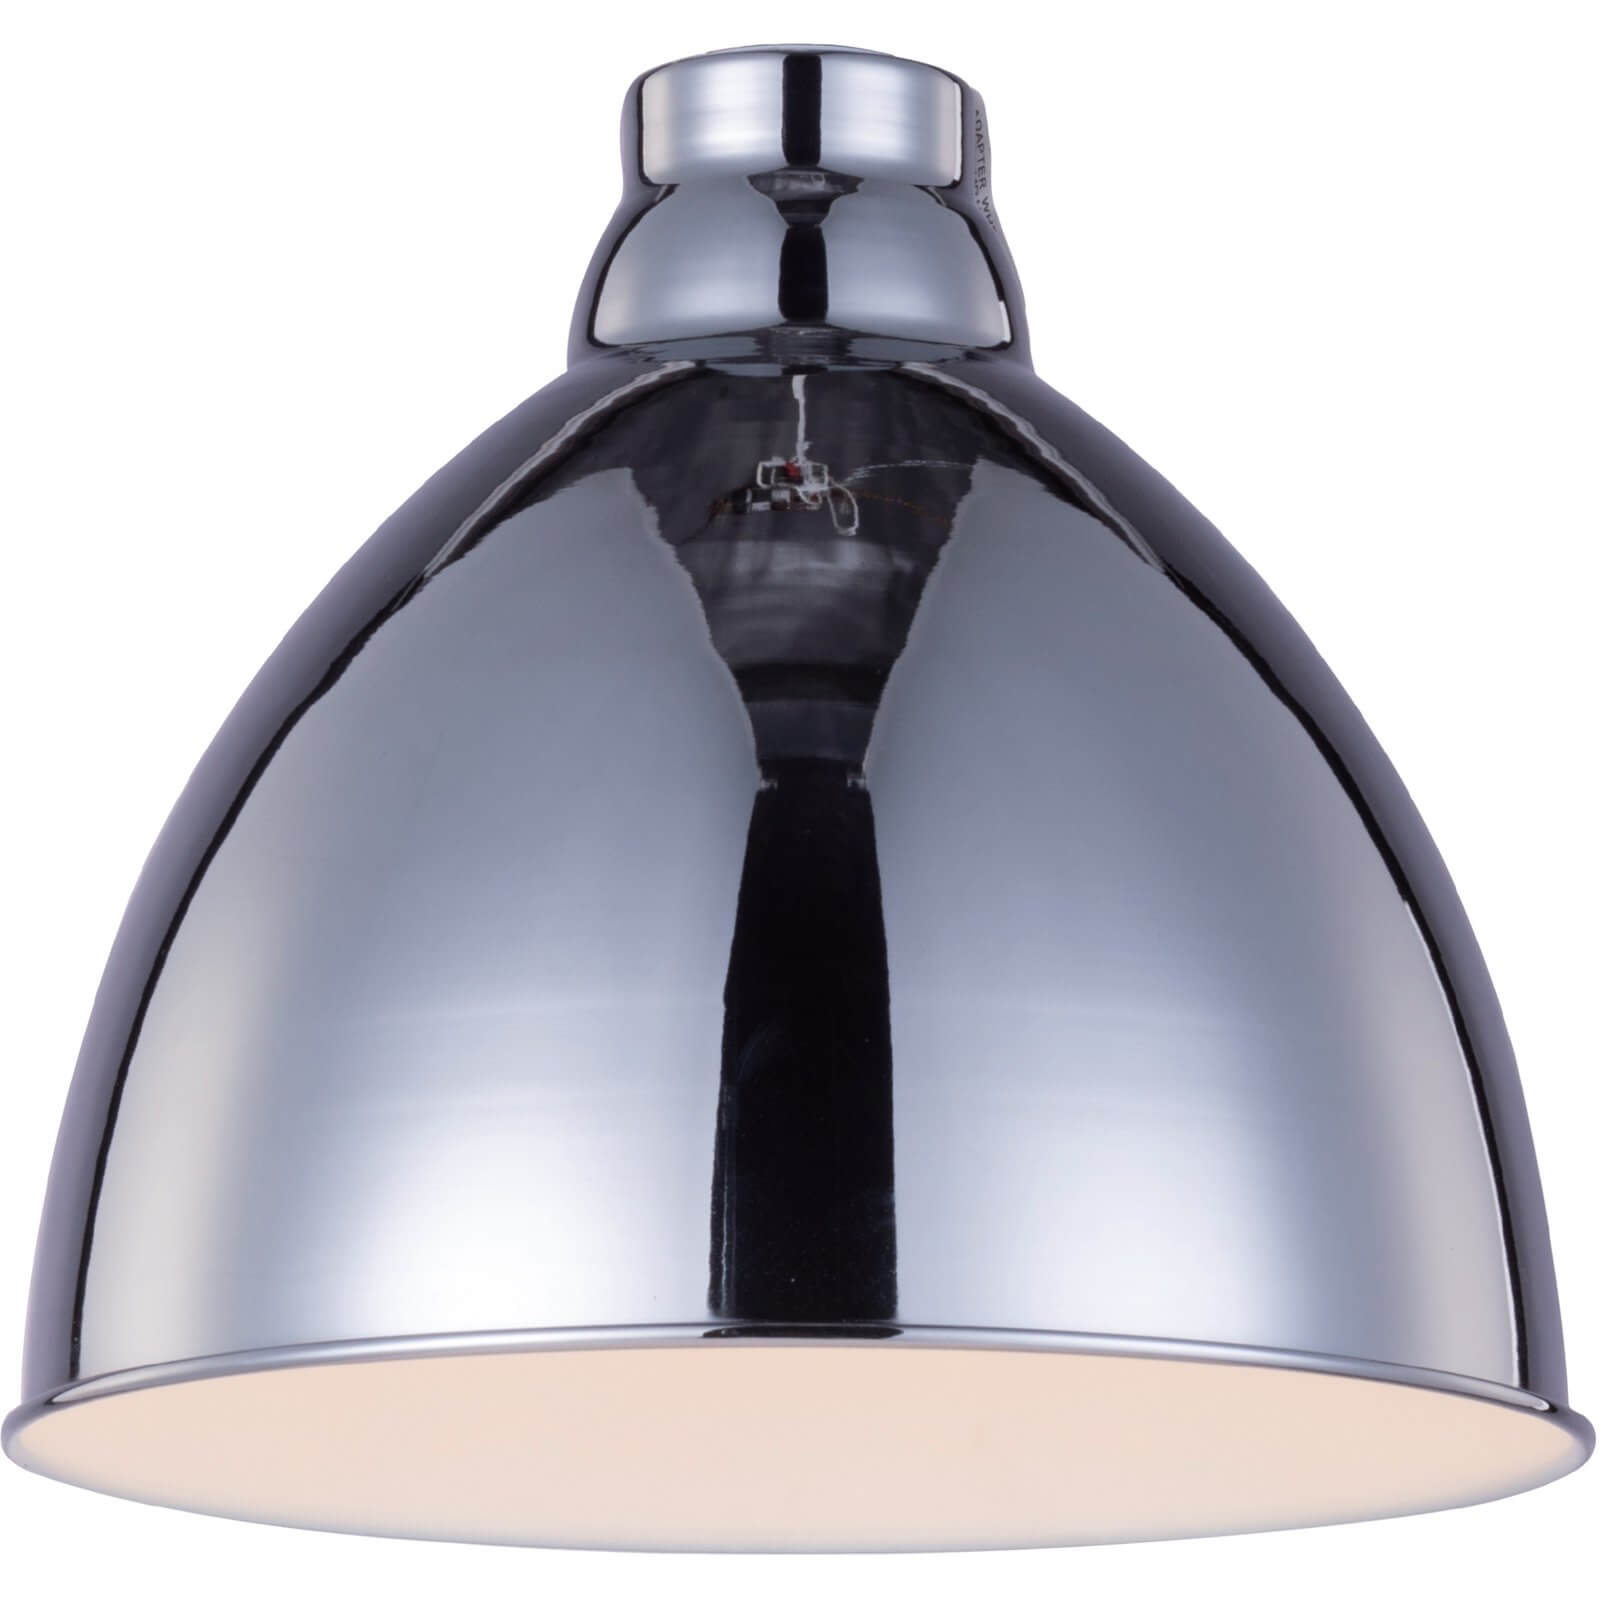 Orla Industrial Metal Easy Fit Light Shade - Chrome